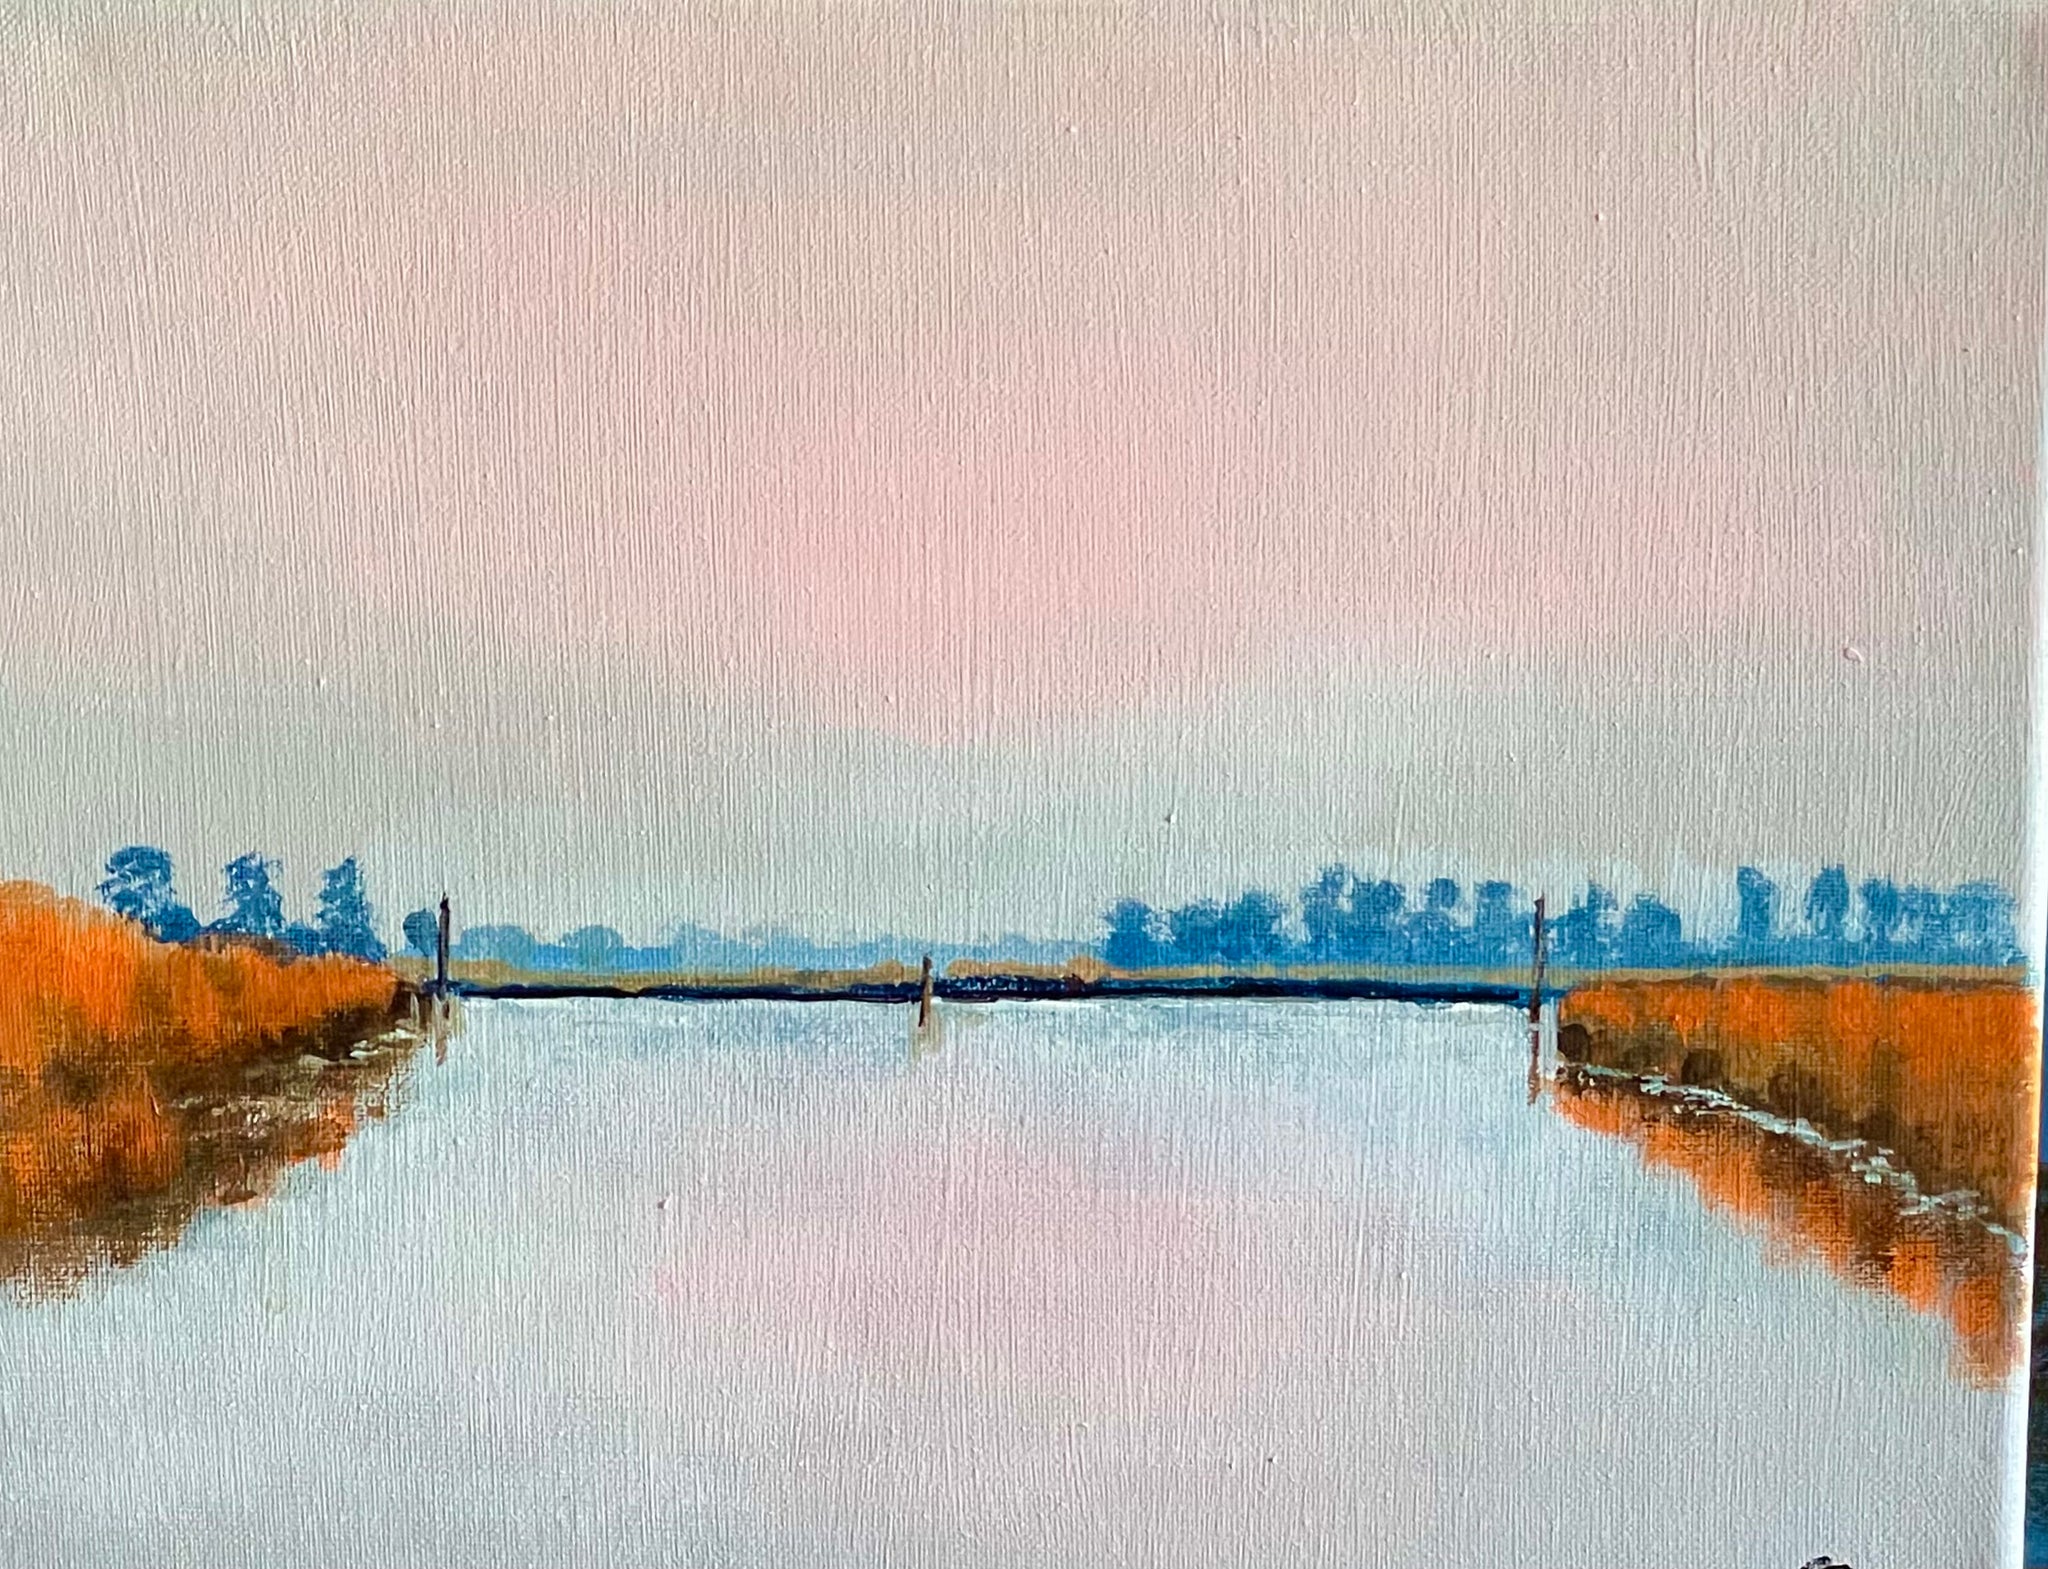 Old Rice Impoundment in the ACE Basin; 11 X 14"; acrylic